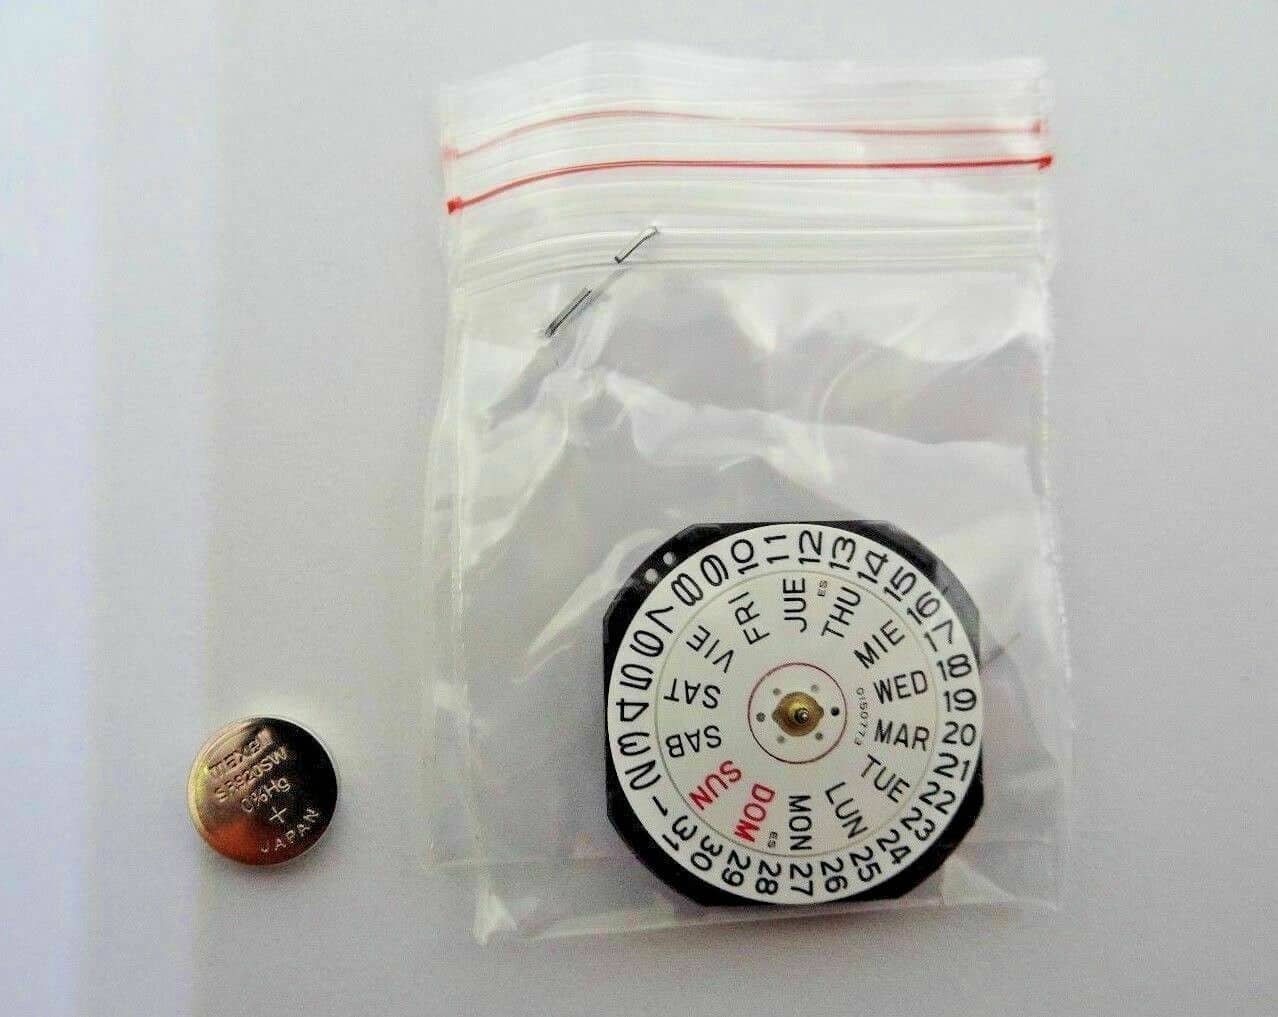 Seiko Watch Battery replacement: 3 top picks